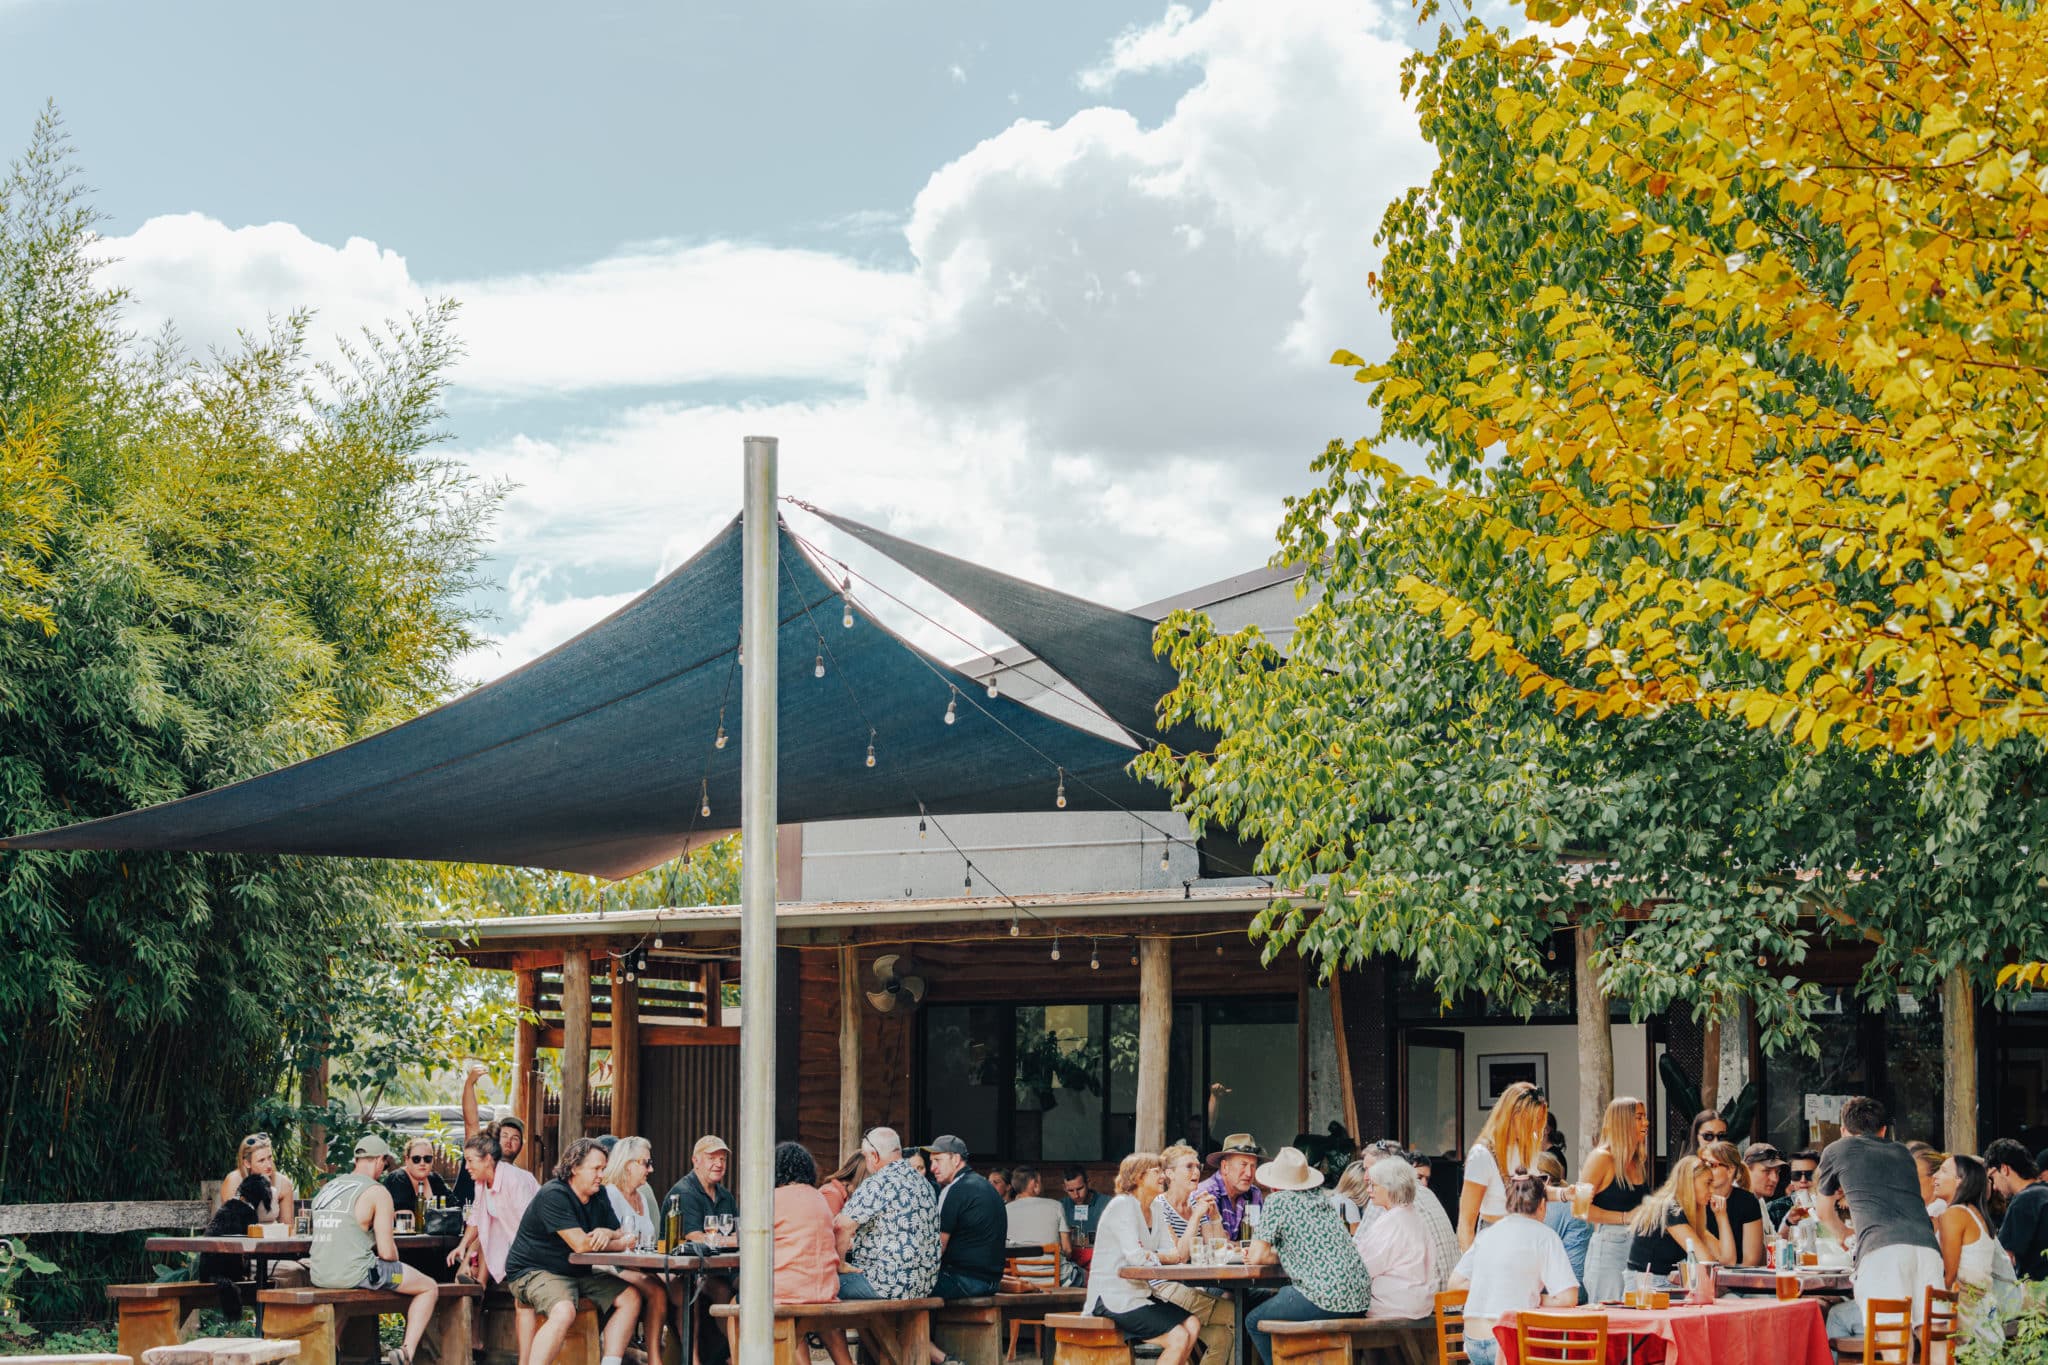 A crowd enjoying the autumn afternoon in the beer garden at Mitta Brewery.